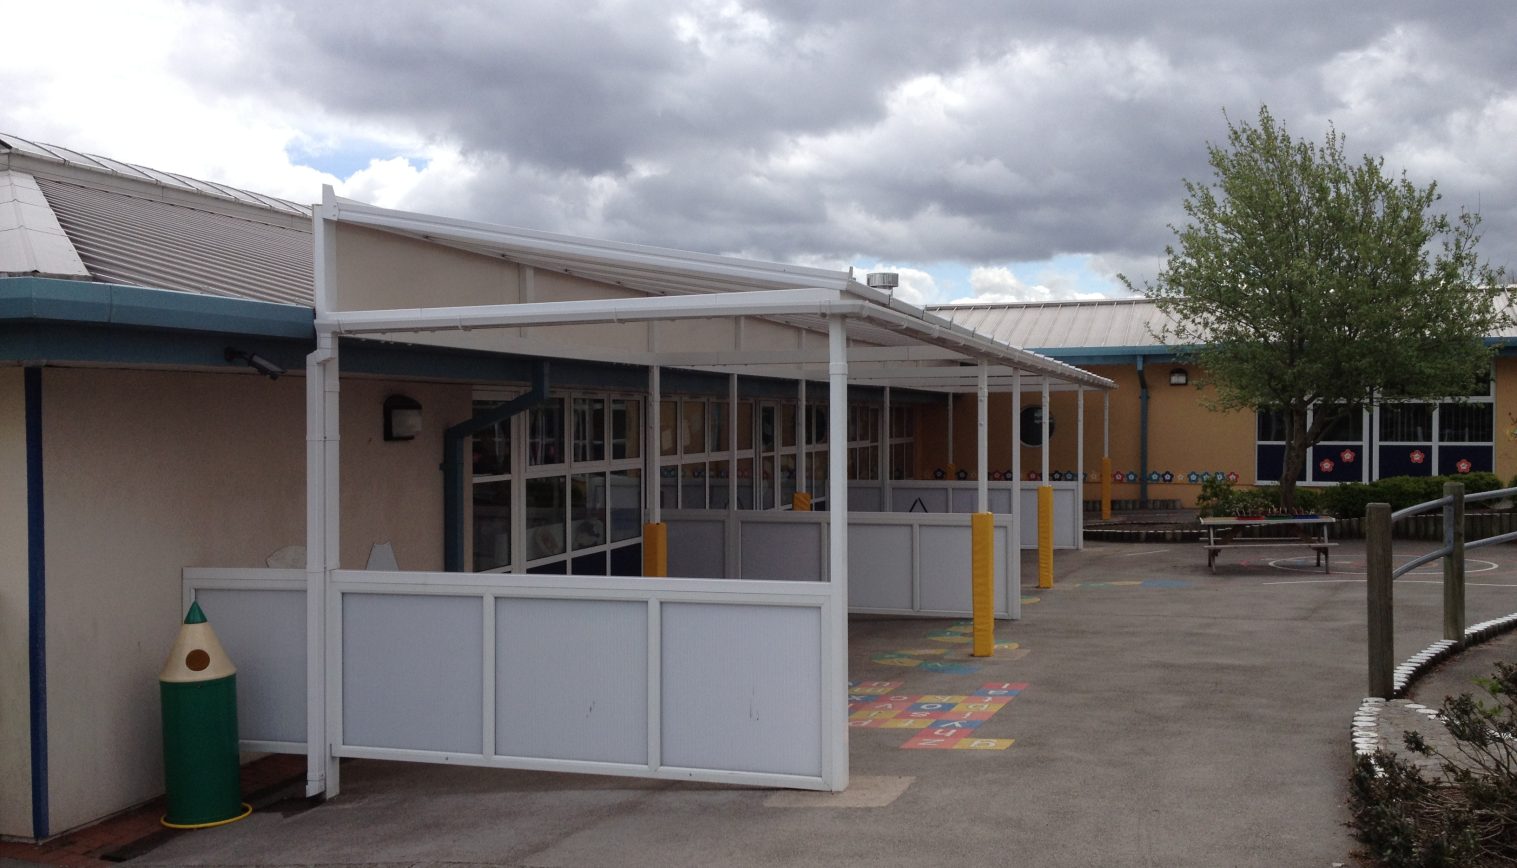 The Brier School – Free Standing Canopy